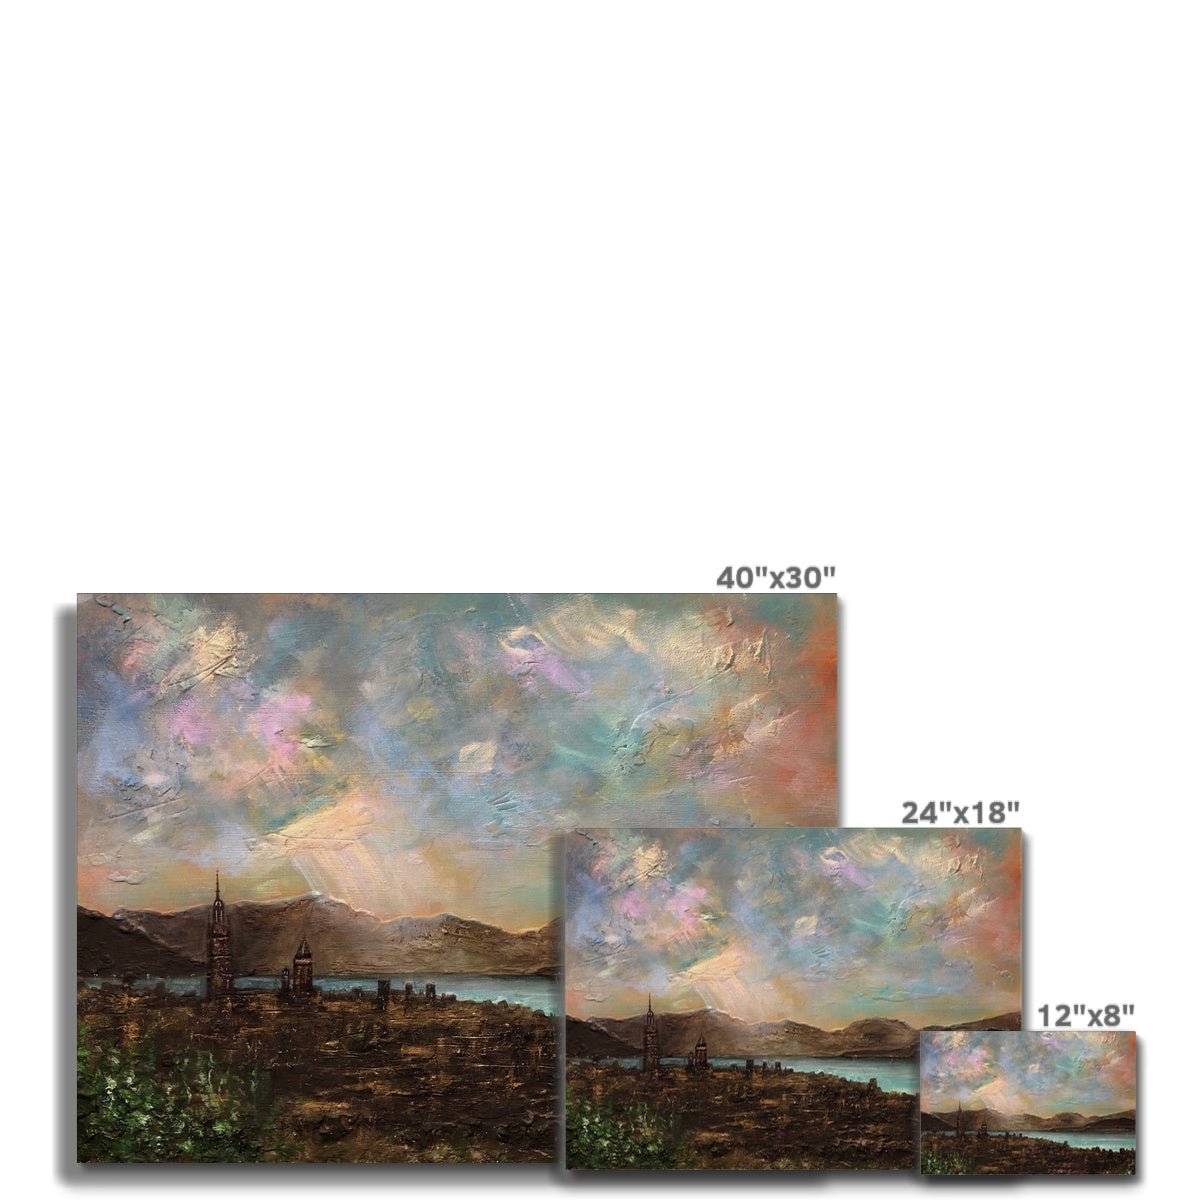 Angels Fingers Over Greenock Painting | Canvas From Scotland-Contemporary Stretched Canvas Prints-River Clyde Art Gallery-Paintings, Prints, Homeware, Art Gifts From Scotland By Scottish Artist Kevin Hunter